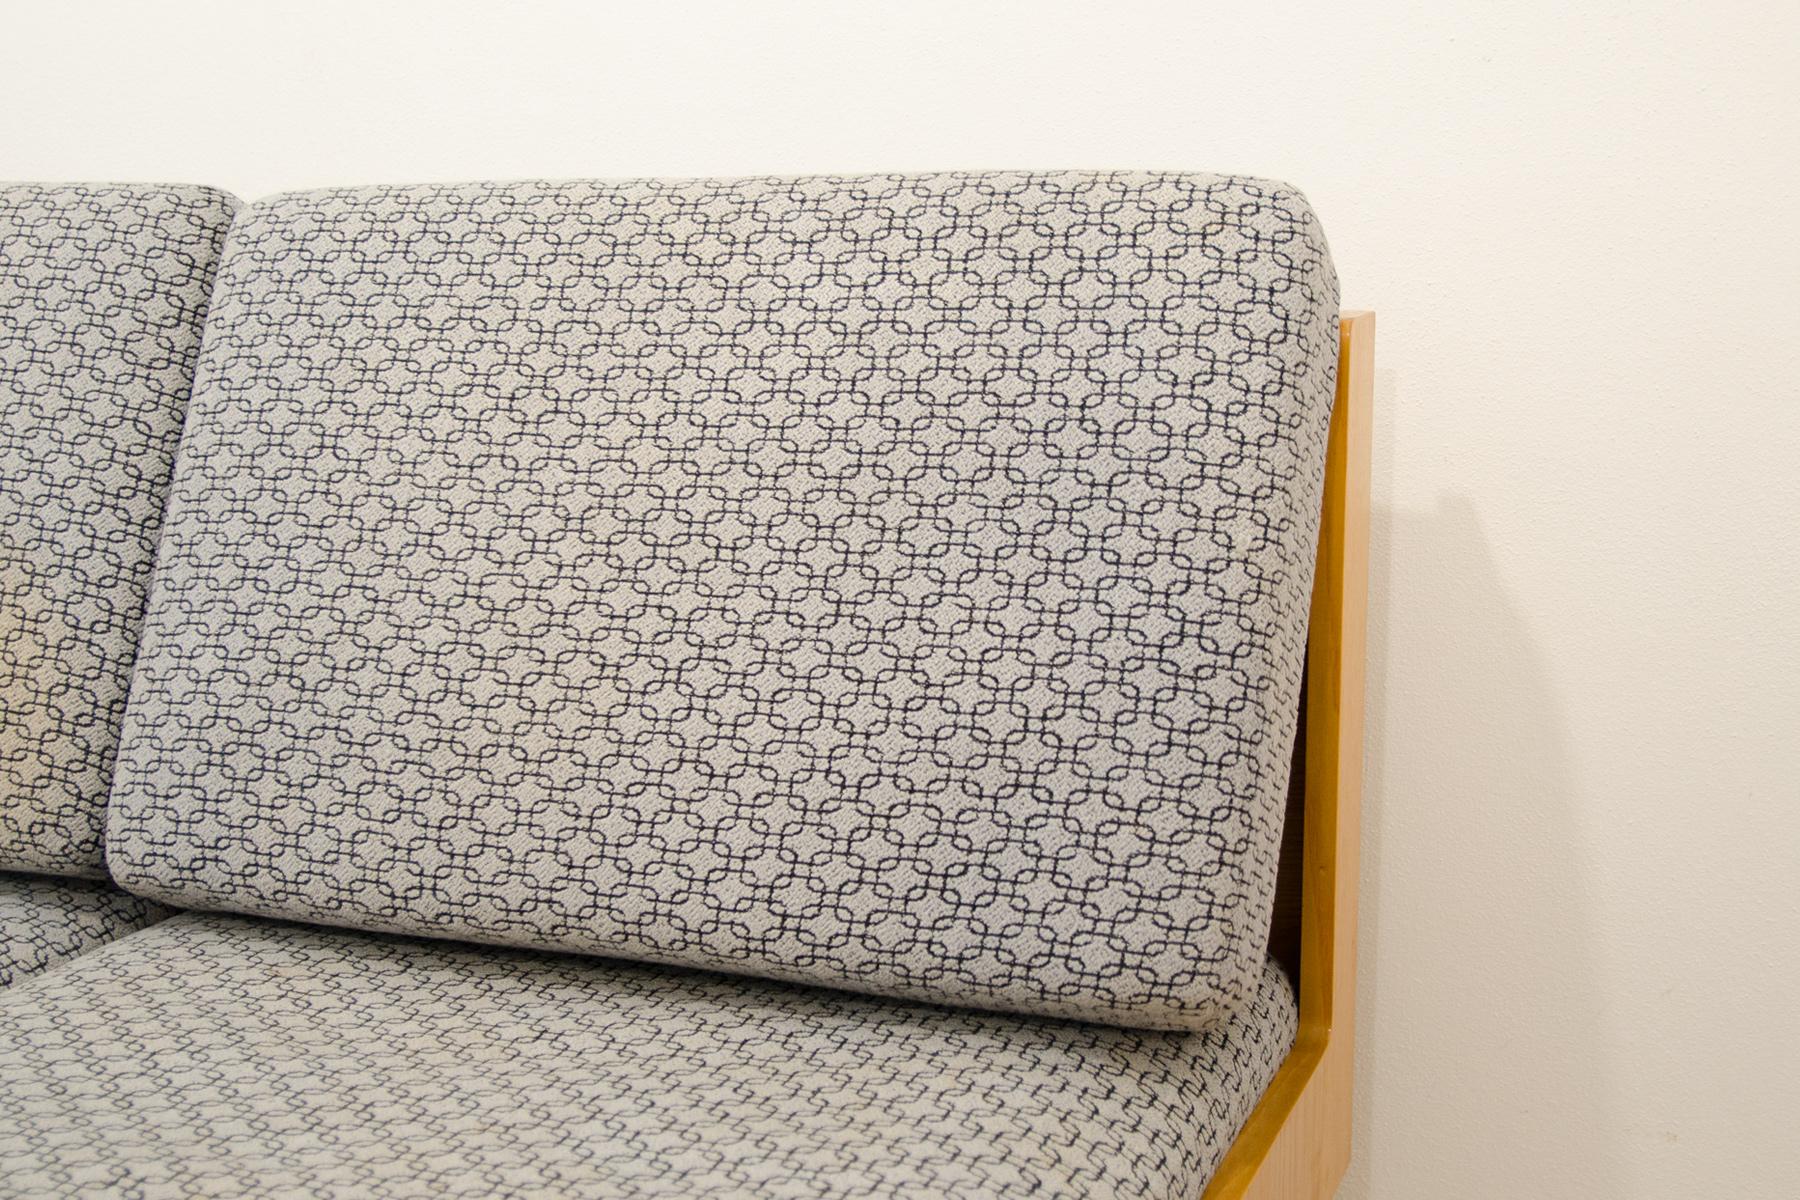 Fabric Mid century folding sofabed, 1960´s, Czechoslovakia For Sale